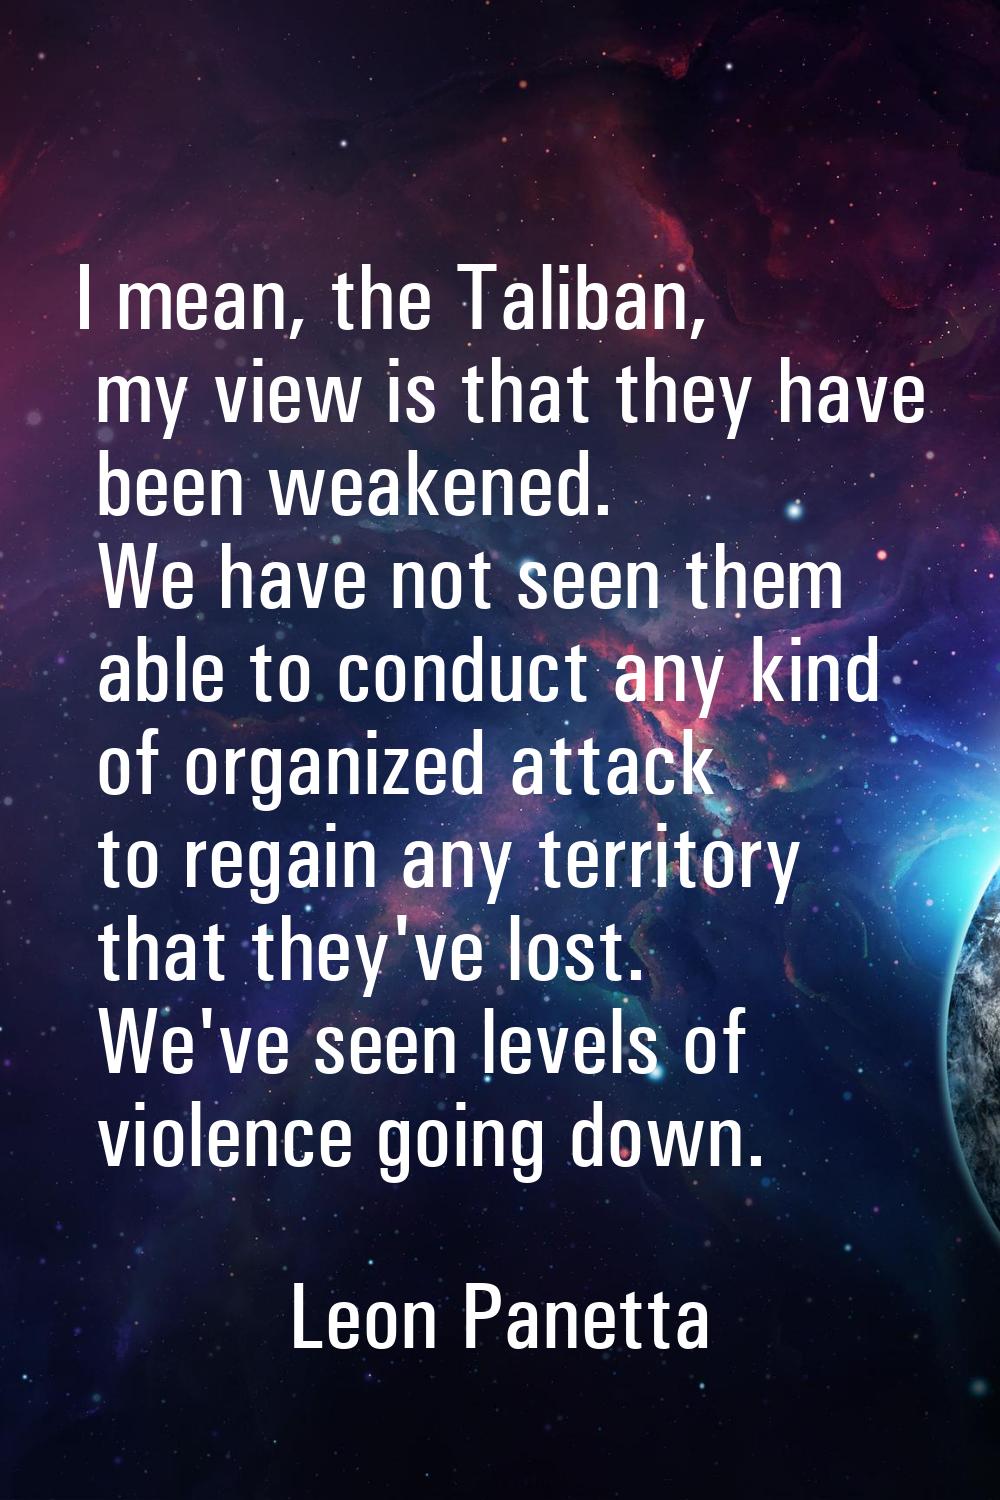 I mean, the Taliban, my view is that they have been weakened. We have not seen them able to conduct